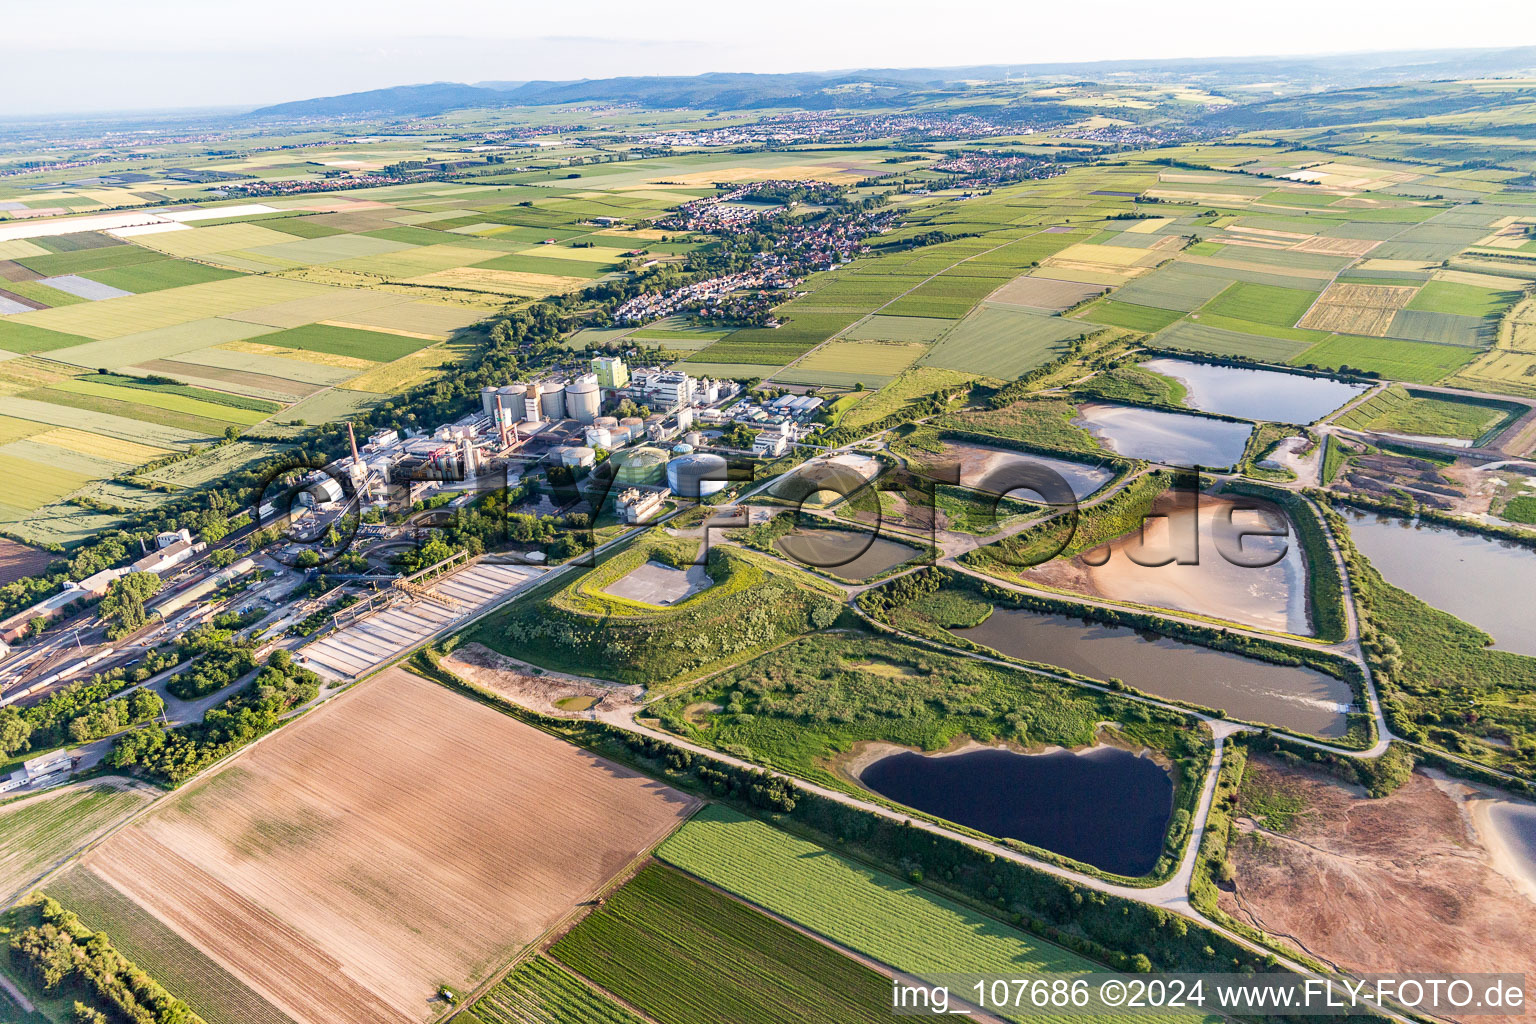 Aerial photograpy of Sewage works Basin for waste water treatment of sugar factory Suedzucker AG in Obrigheim (Pfalz) in the state Rhineland-Palatinate, Germany